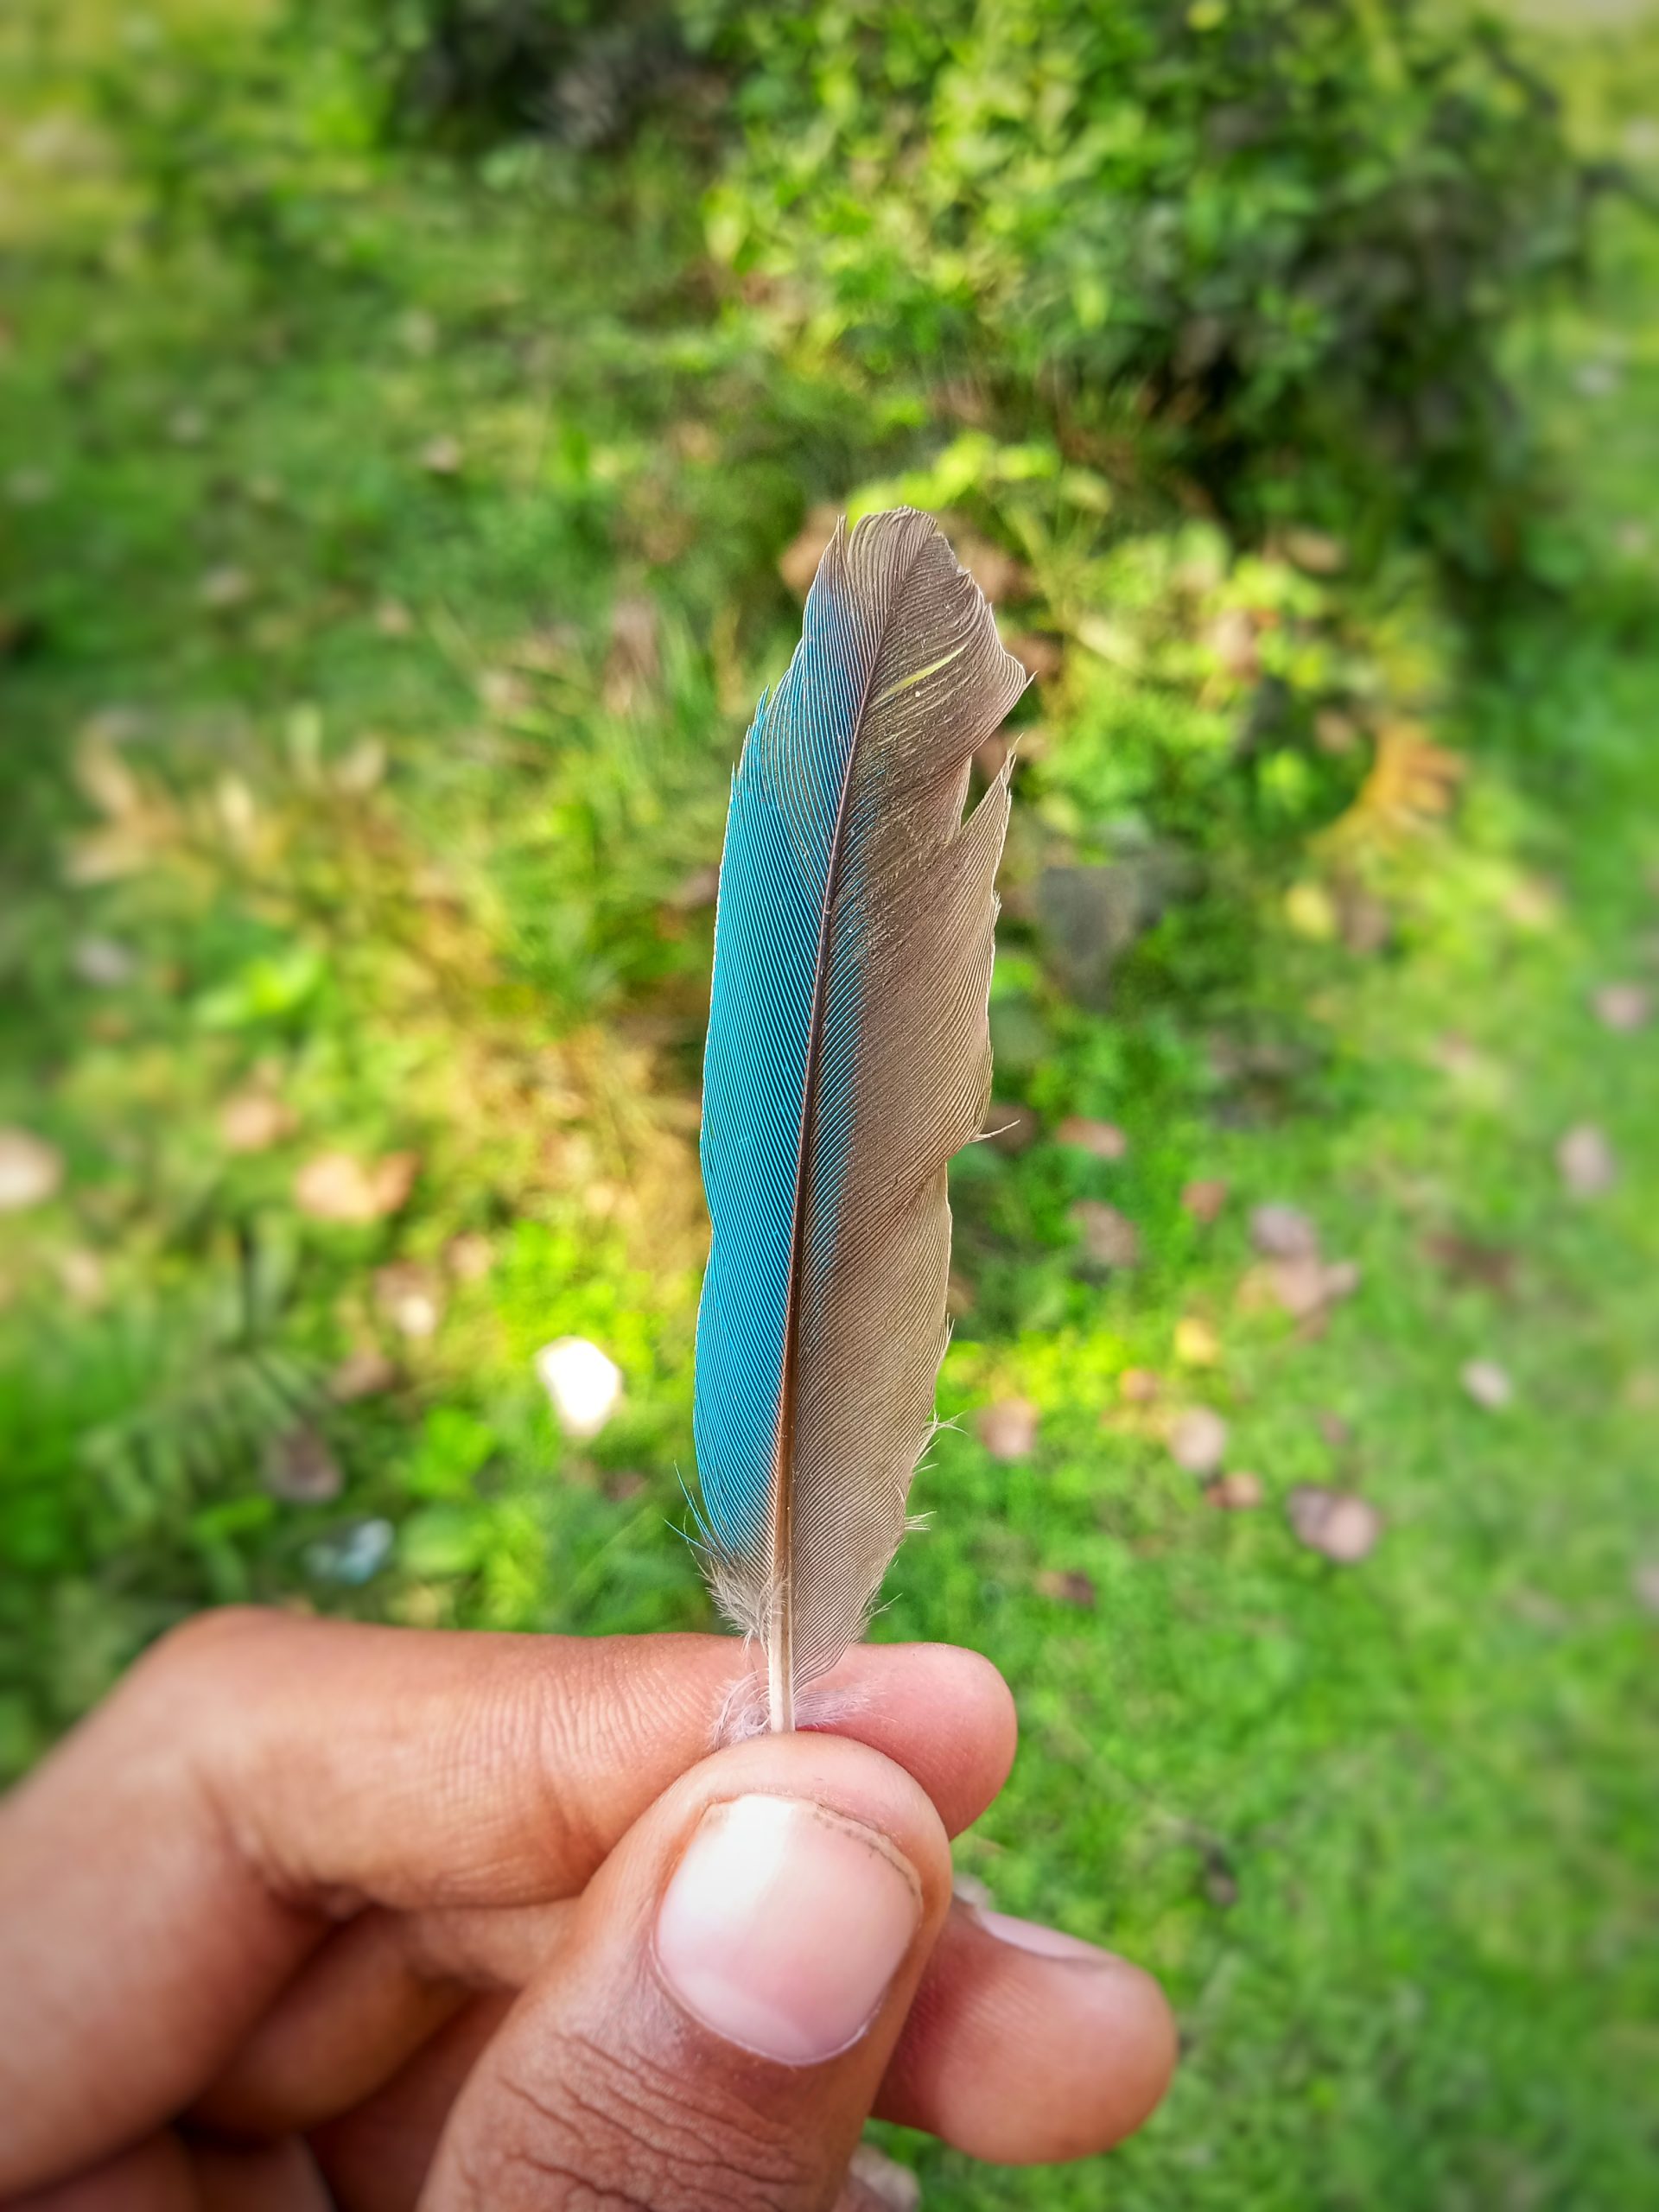 A bird, feather in hand